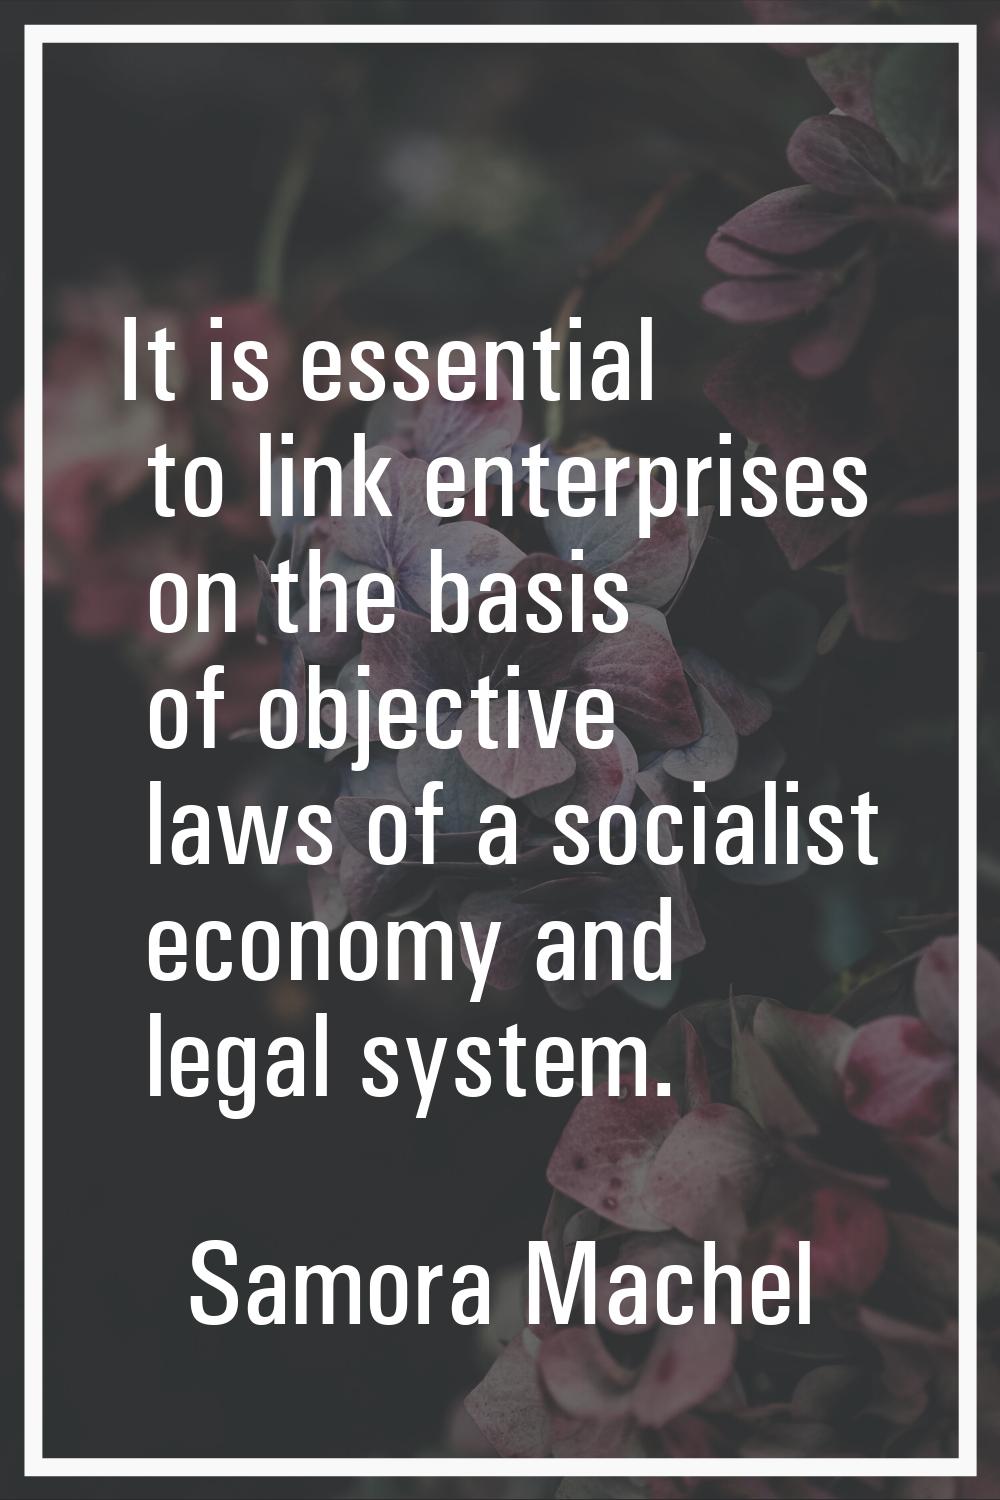 It is essential to link enterprises on the basis of objective laws of a socialist economy and legal